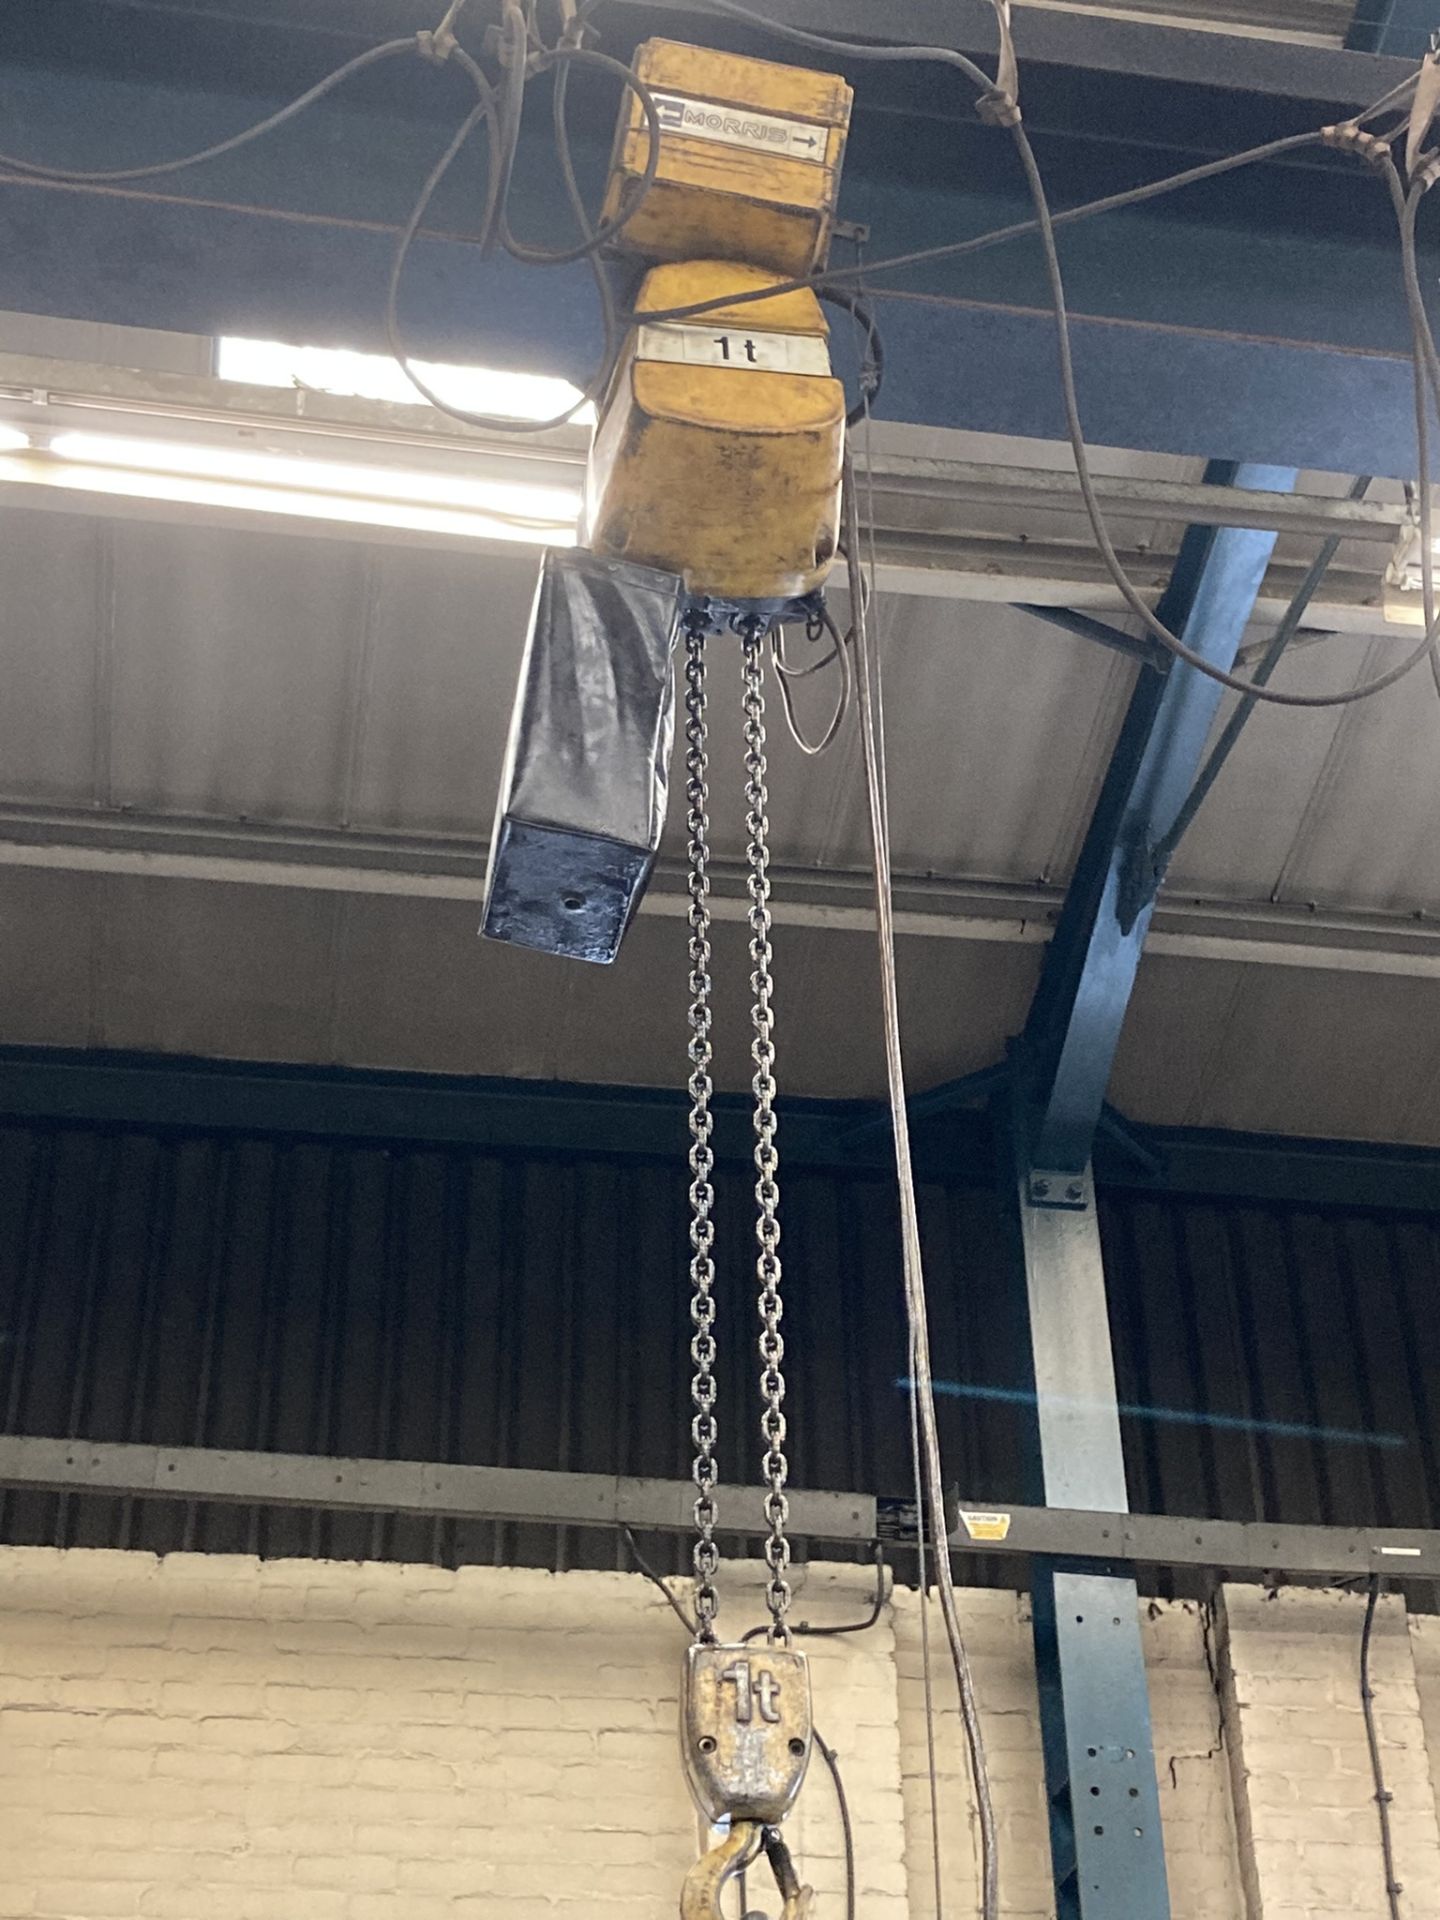 1 Tonne Rated Capacity A-Frame Hoist with a Morris Electric Pendant Controlled Hoist, Span of Frame